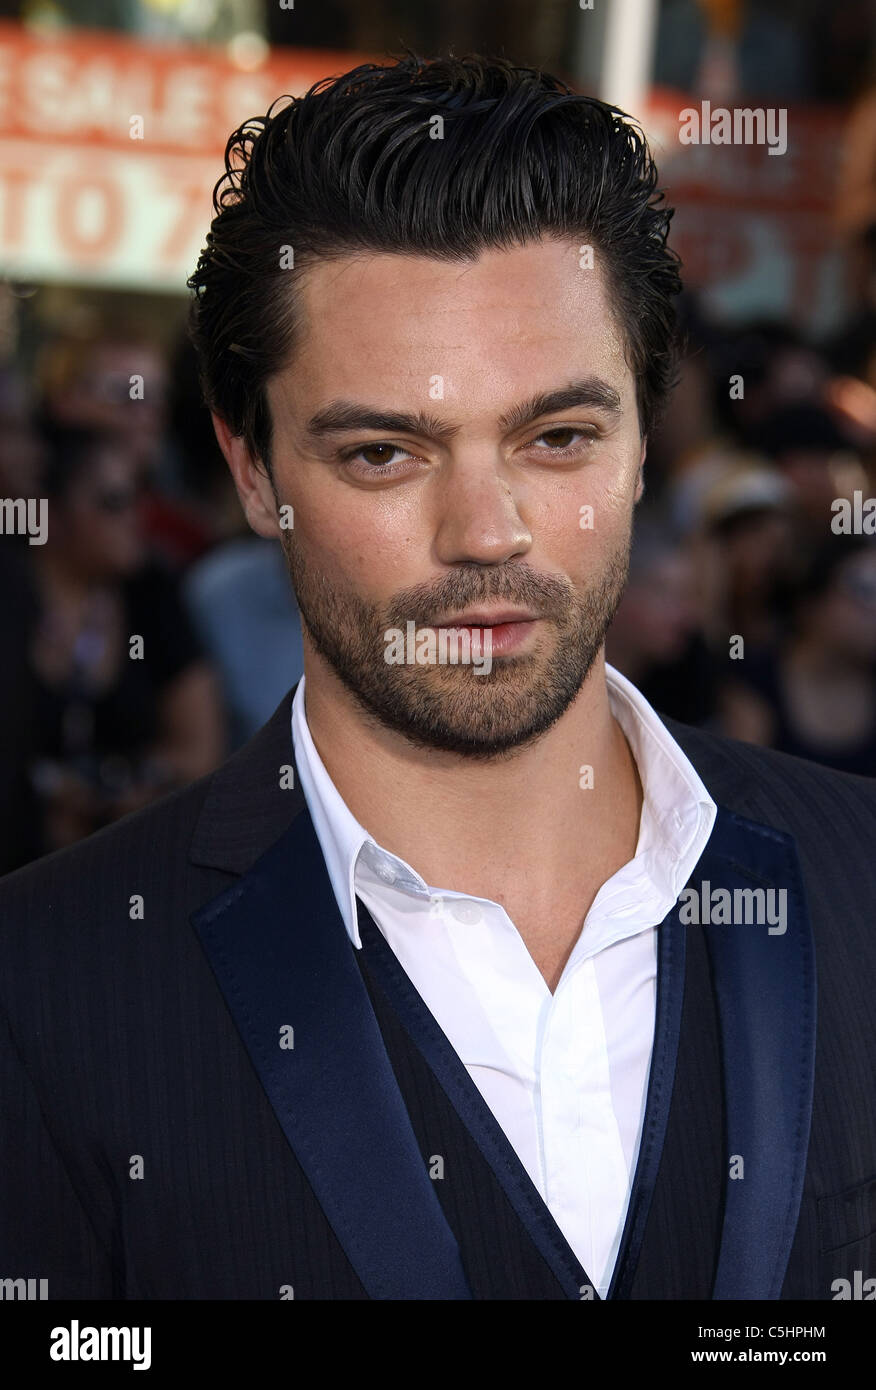 DOMINIC COOPER CAPTAIN AMERICA: THE FIRST AVENGER. PREMIERE HOLLYWOOD LOS ANGELES CALIFORNIA USA 19 July 2011 Stock Photo